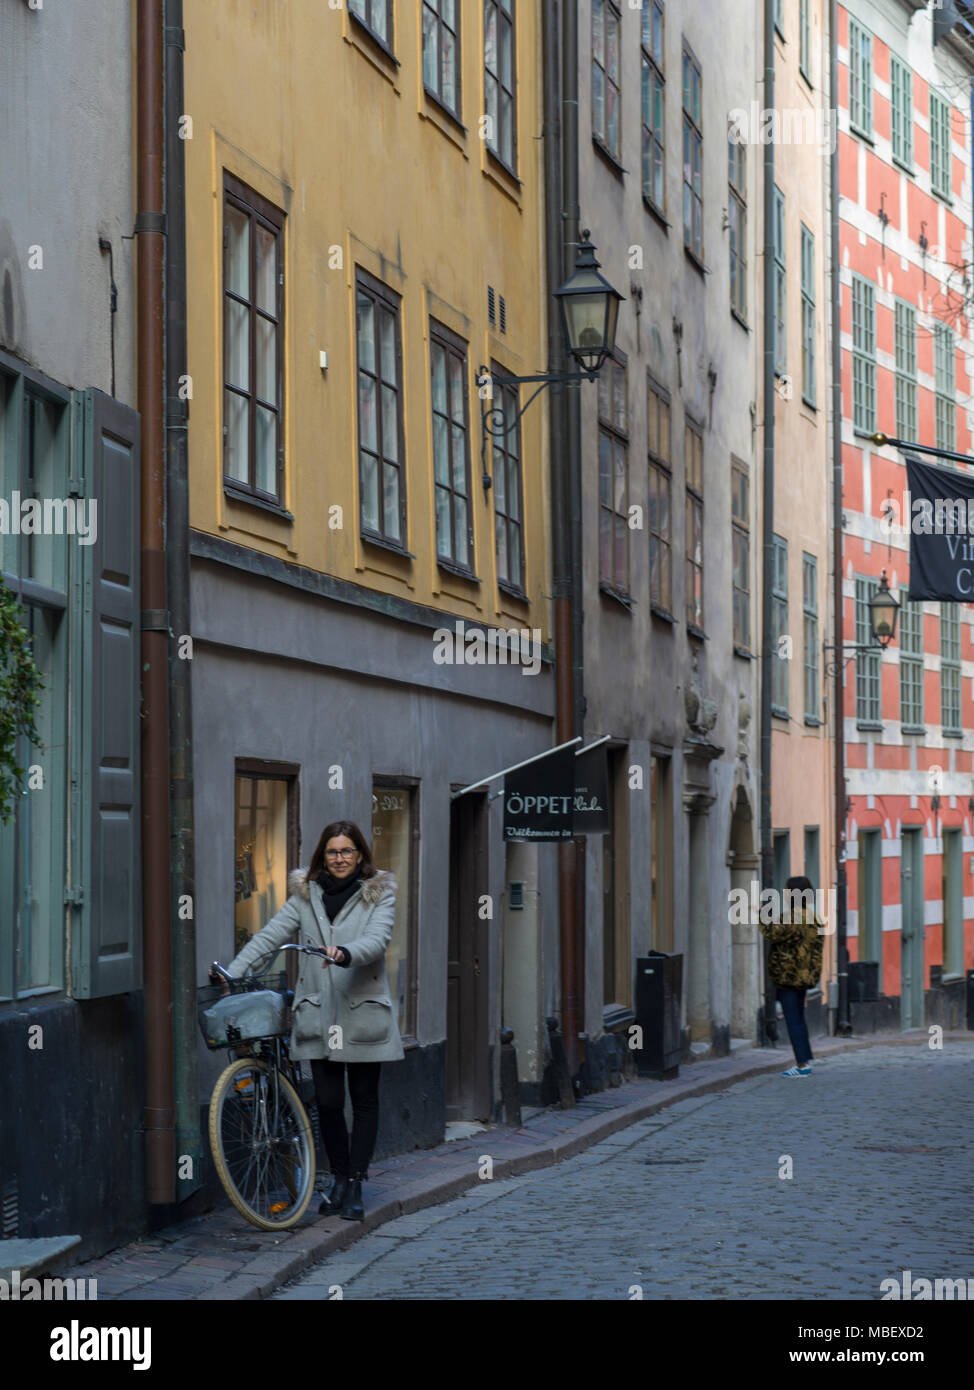 Woman standing with bicycle in street, Gamla Stan, Stockholm, Sweden Stock Photo